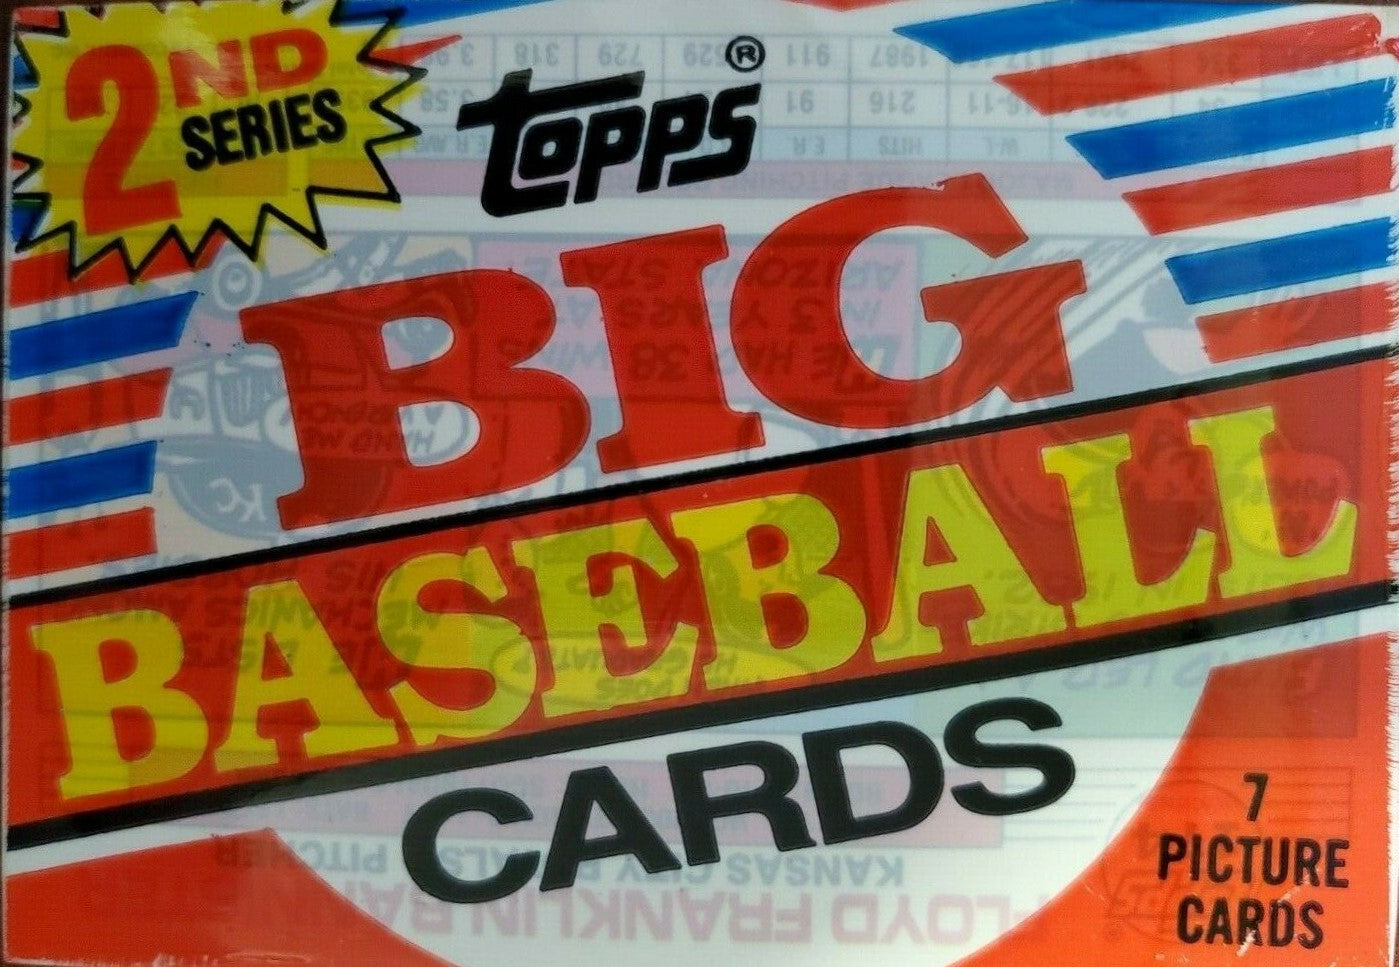 1988 Topps Big Baseball Cards 2nd Series Wax Pack - 7 LARGE CARDS PER PACK